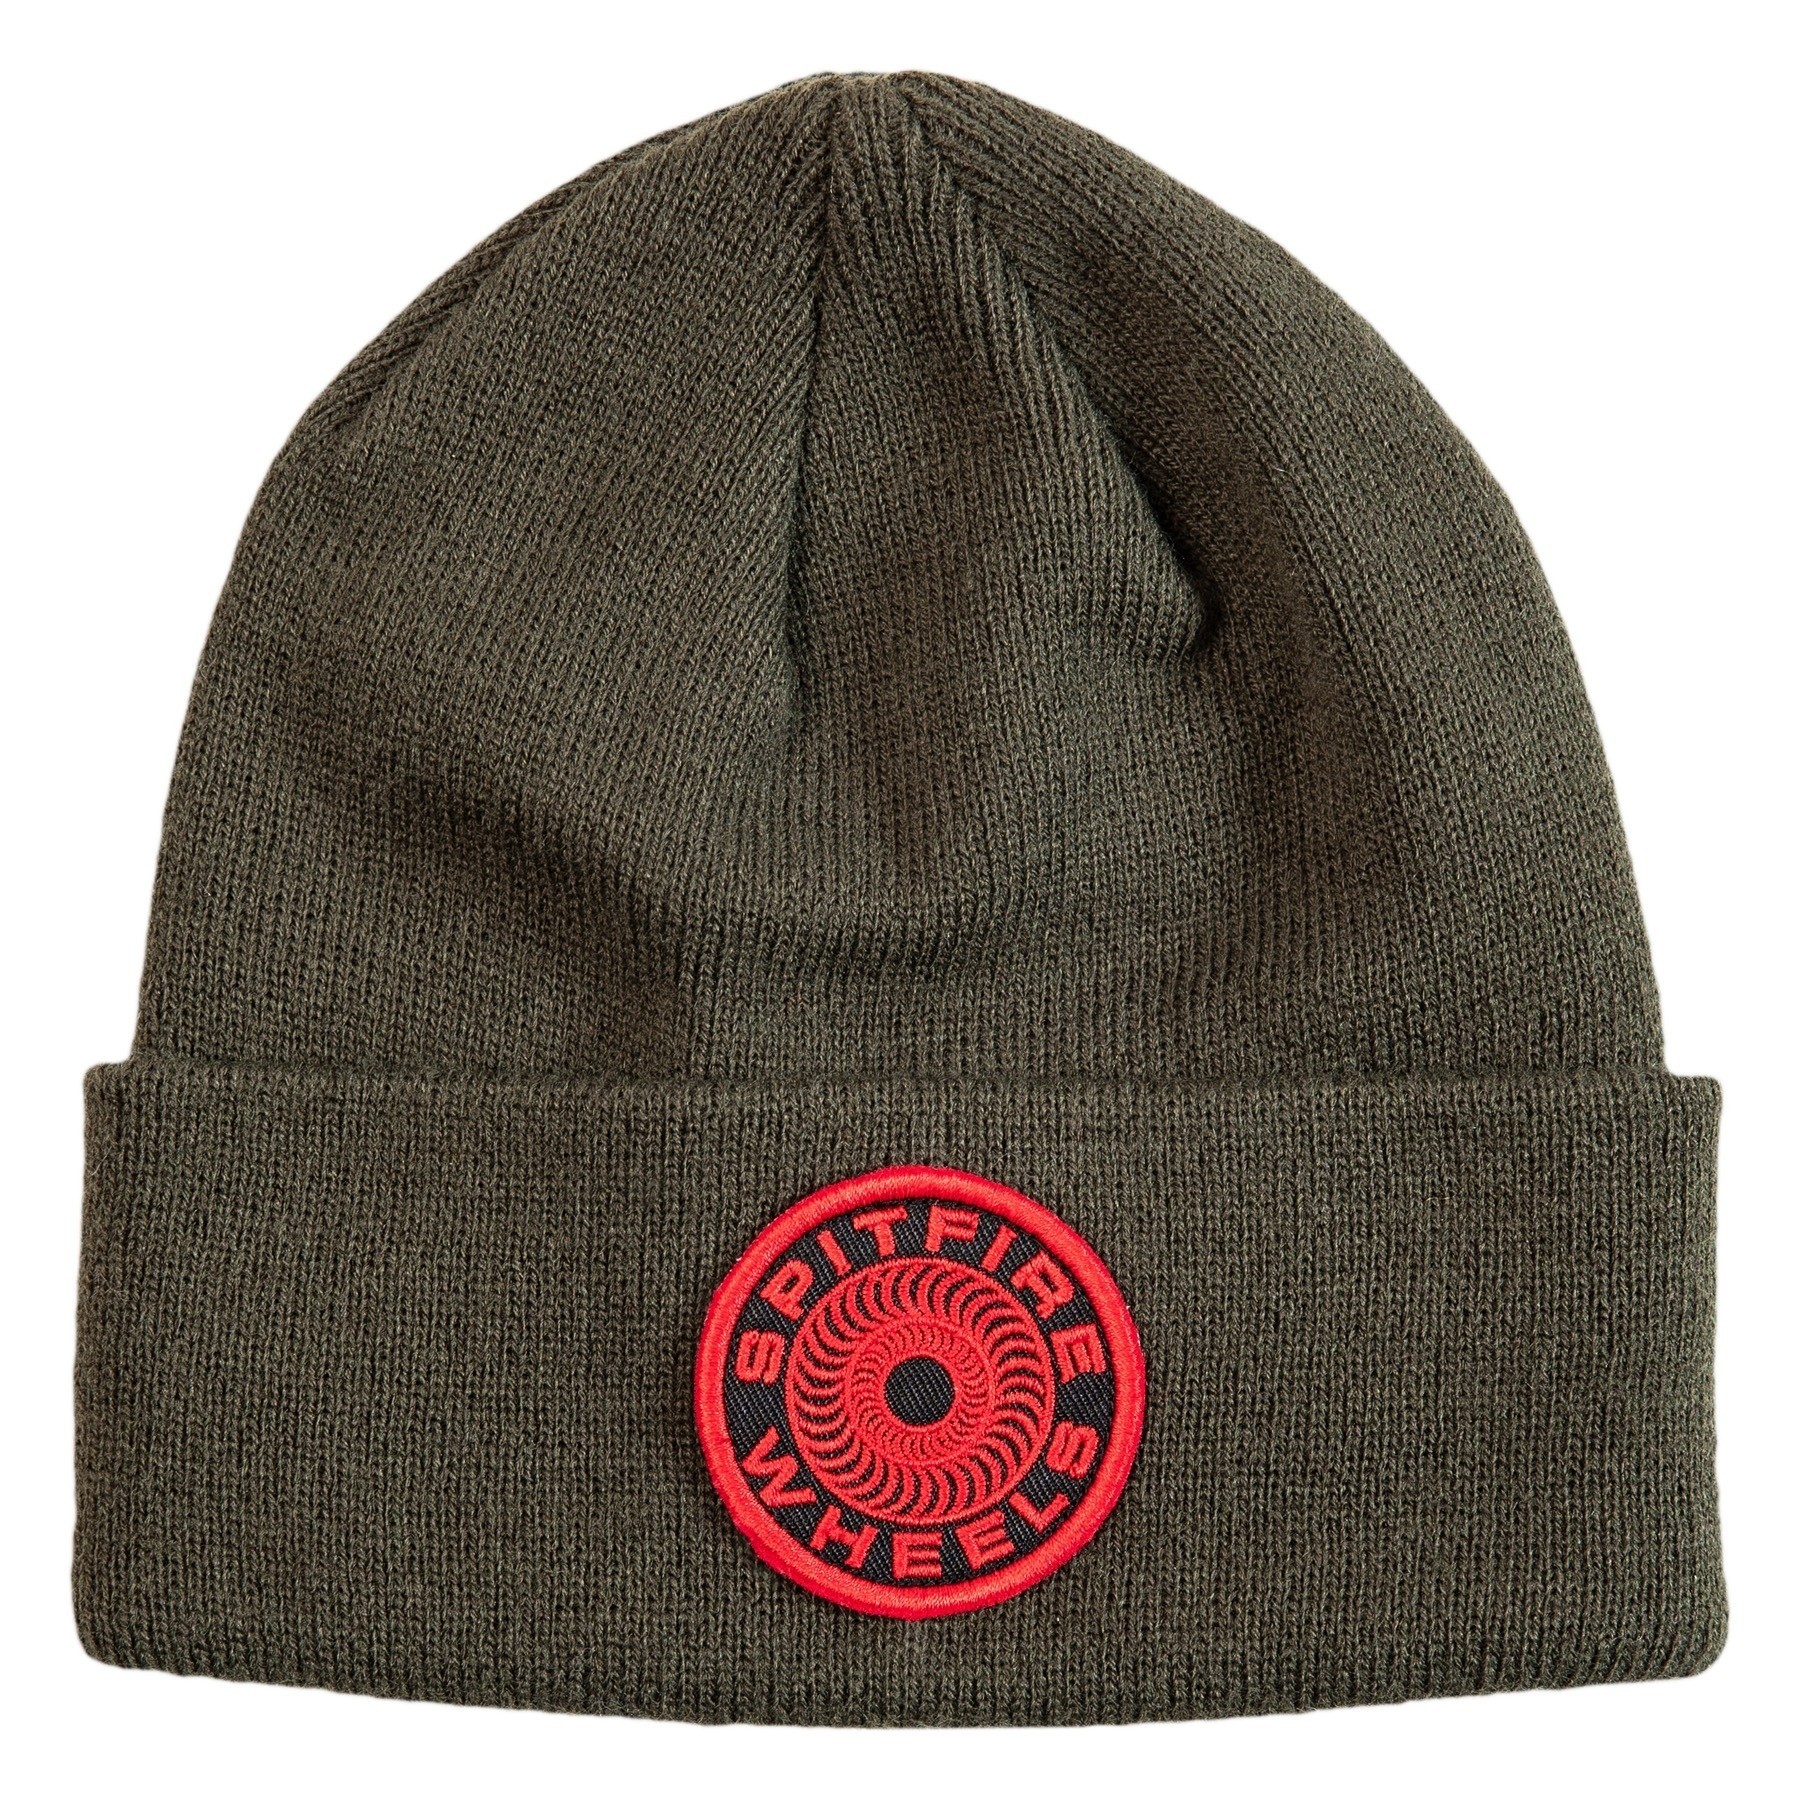 Classic 87 Swirl Patch Beanie (Olive/Red)